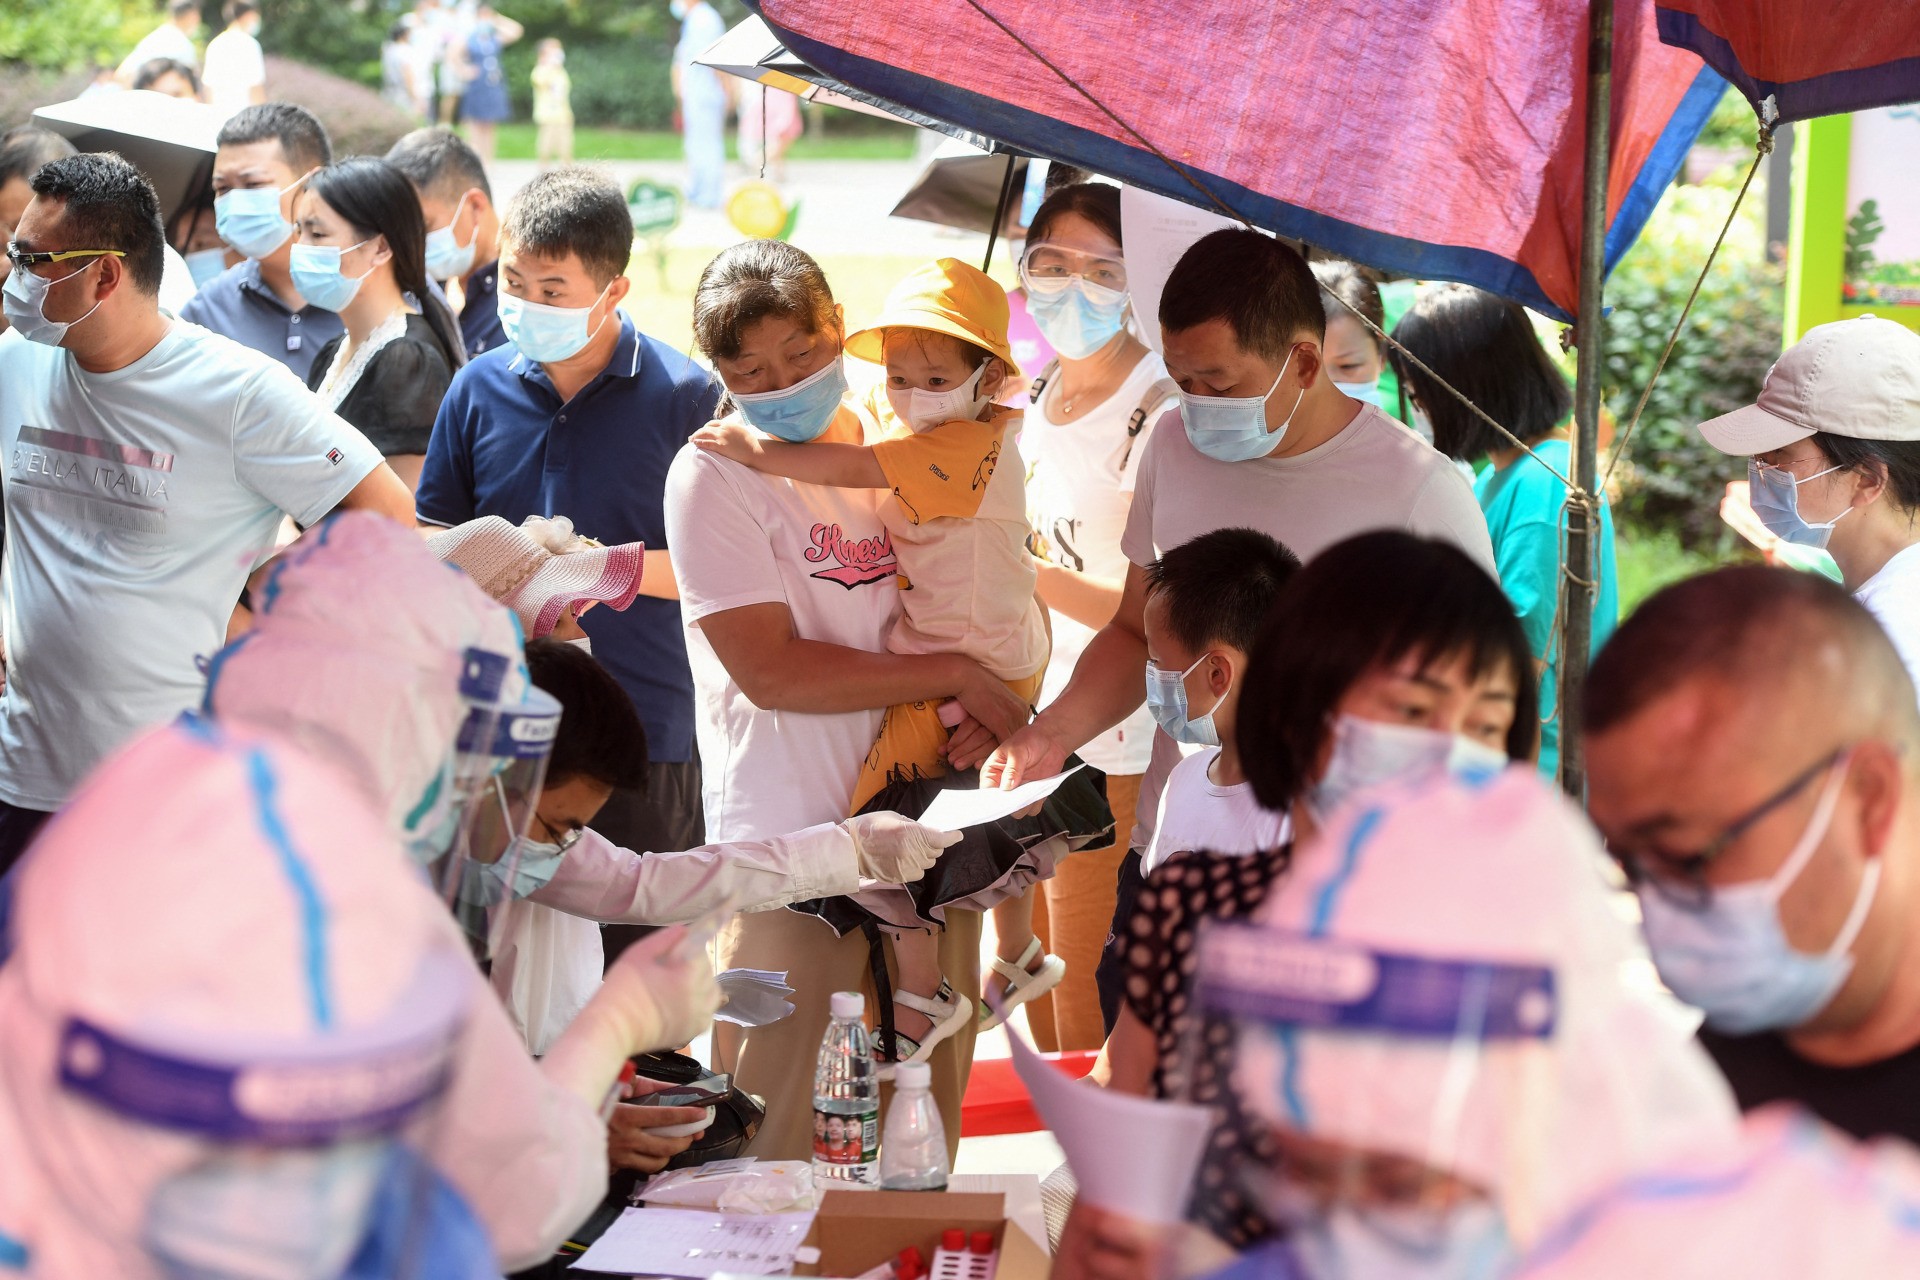 TOPSHOT - Residents queue to take nucleic acid tests for the coronavirus in Wuhan in China's central Hubei province on August 3, 2021, as the city tests its entire population for Covid-19. - China OUT (Photo by STR / AFP) / China OUT (Photo by STR/AFP via Getty Images)